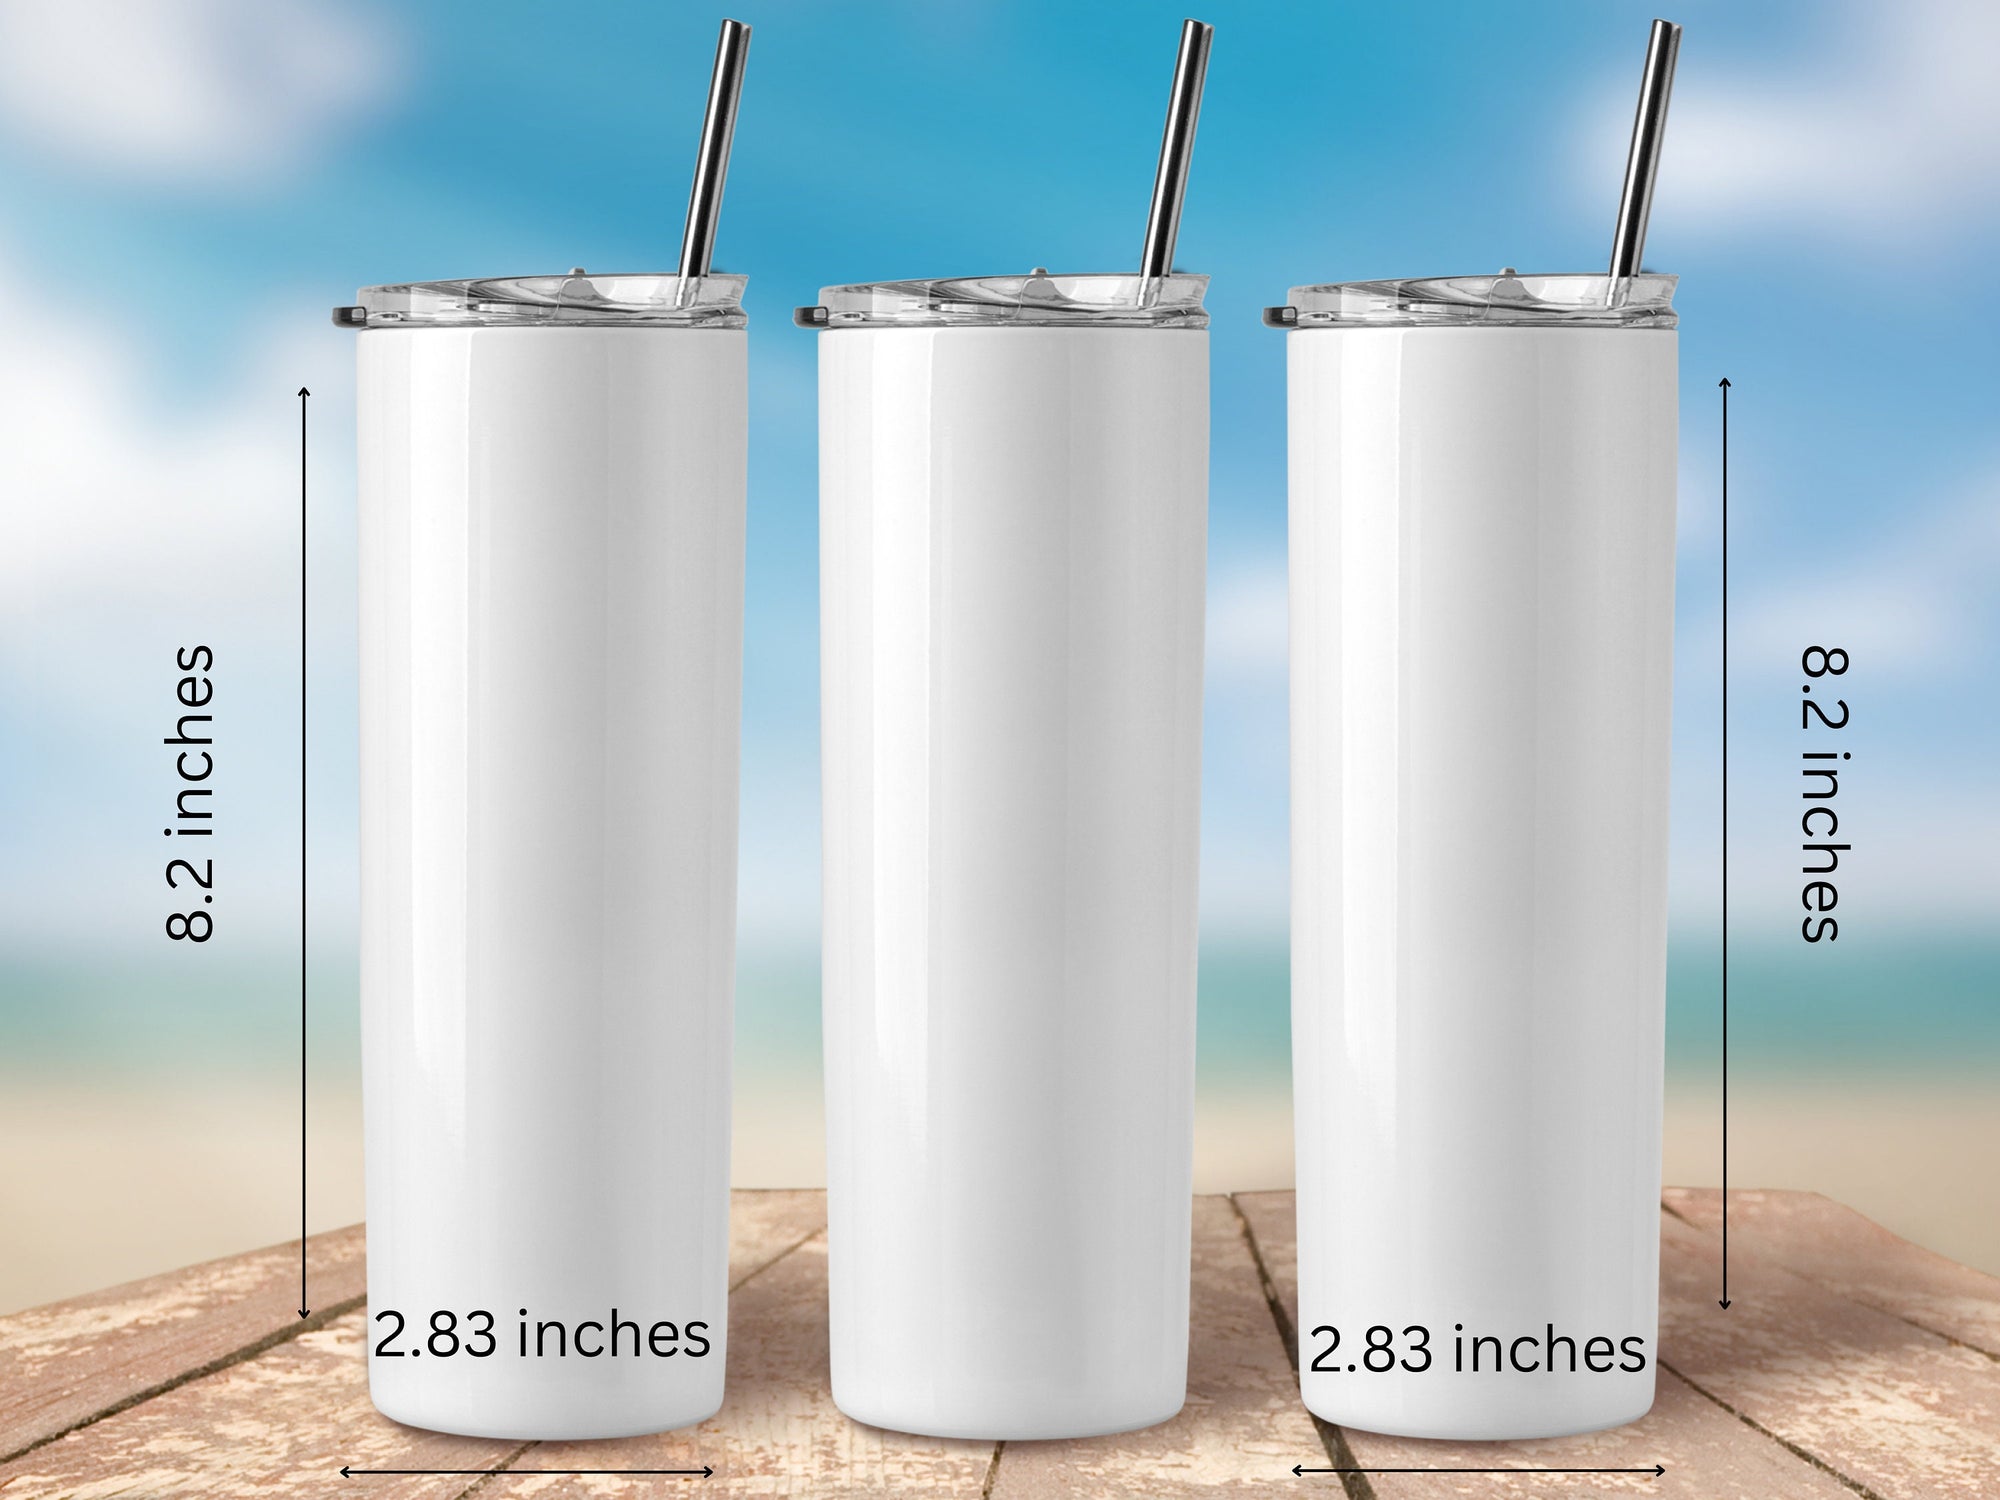 Personalized 20 oz Stainless Steel Tumbler/Includes Metal Straw/Deer Design/#316